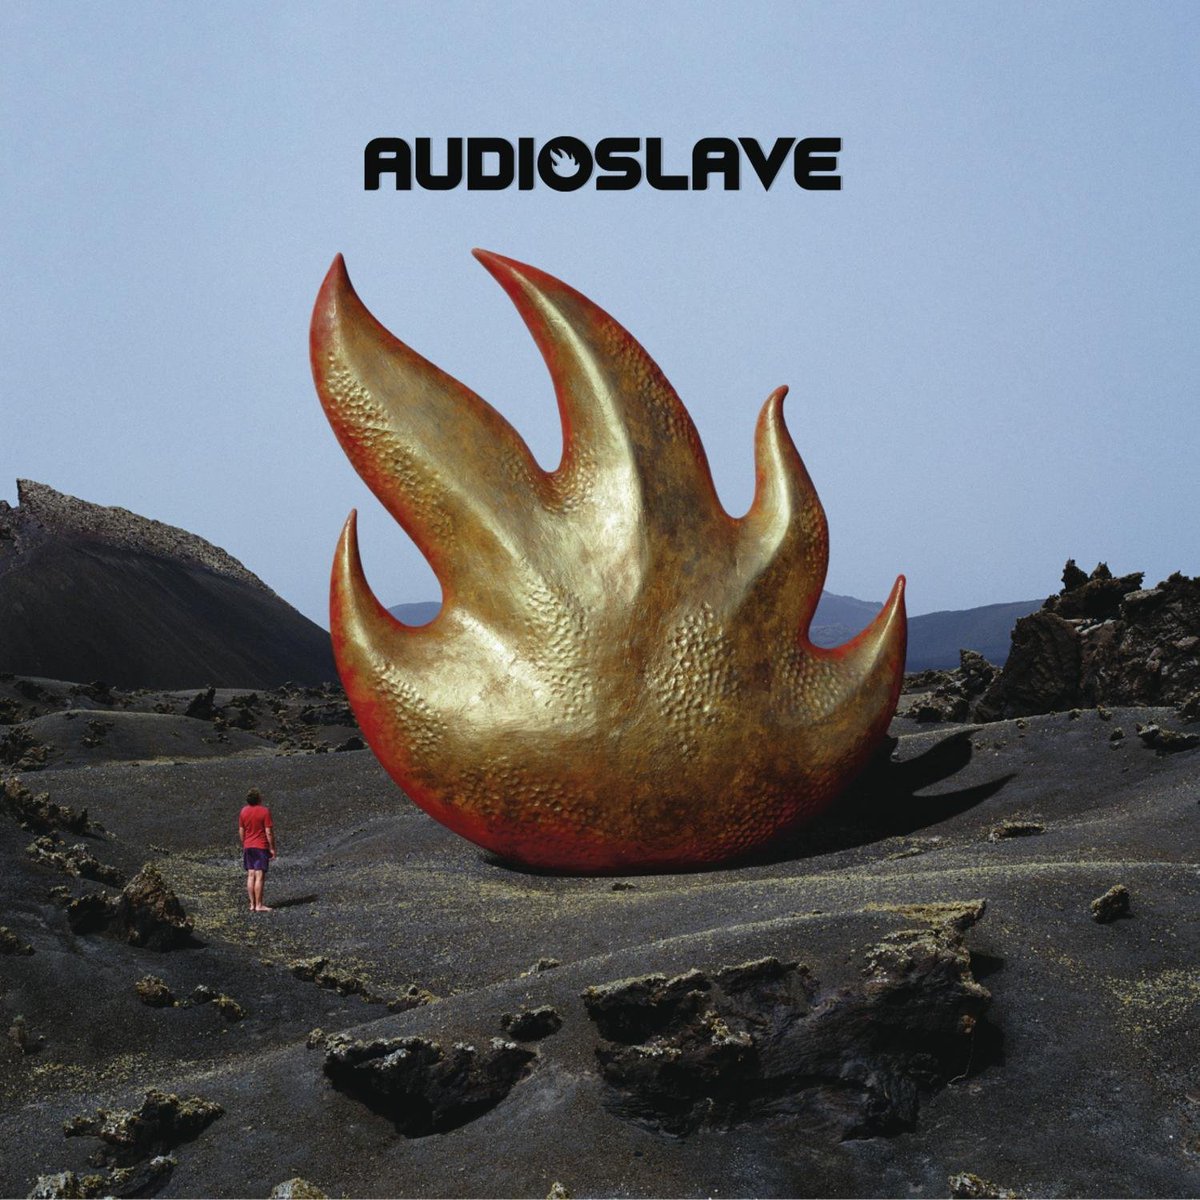 Today is the 16th Anniversary of the release of Audioslave’s debut album! smarturl.it/Audioslave2002